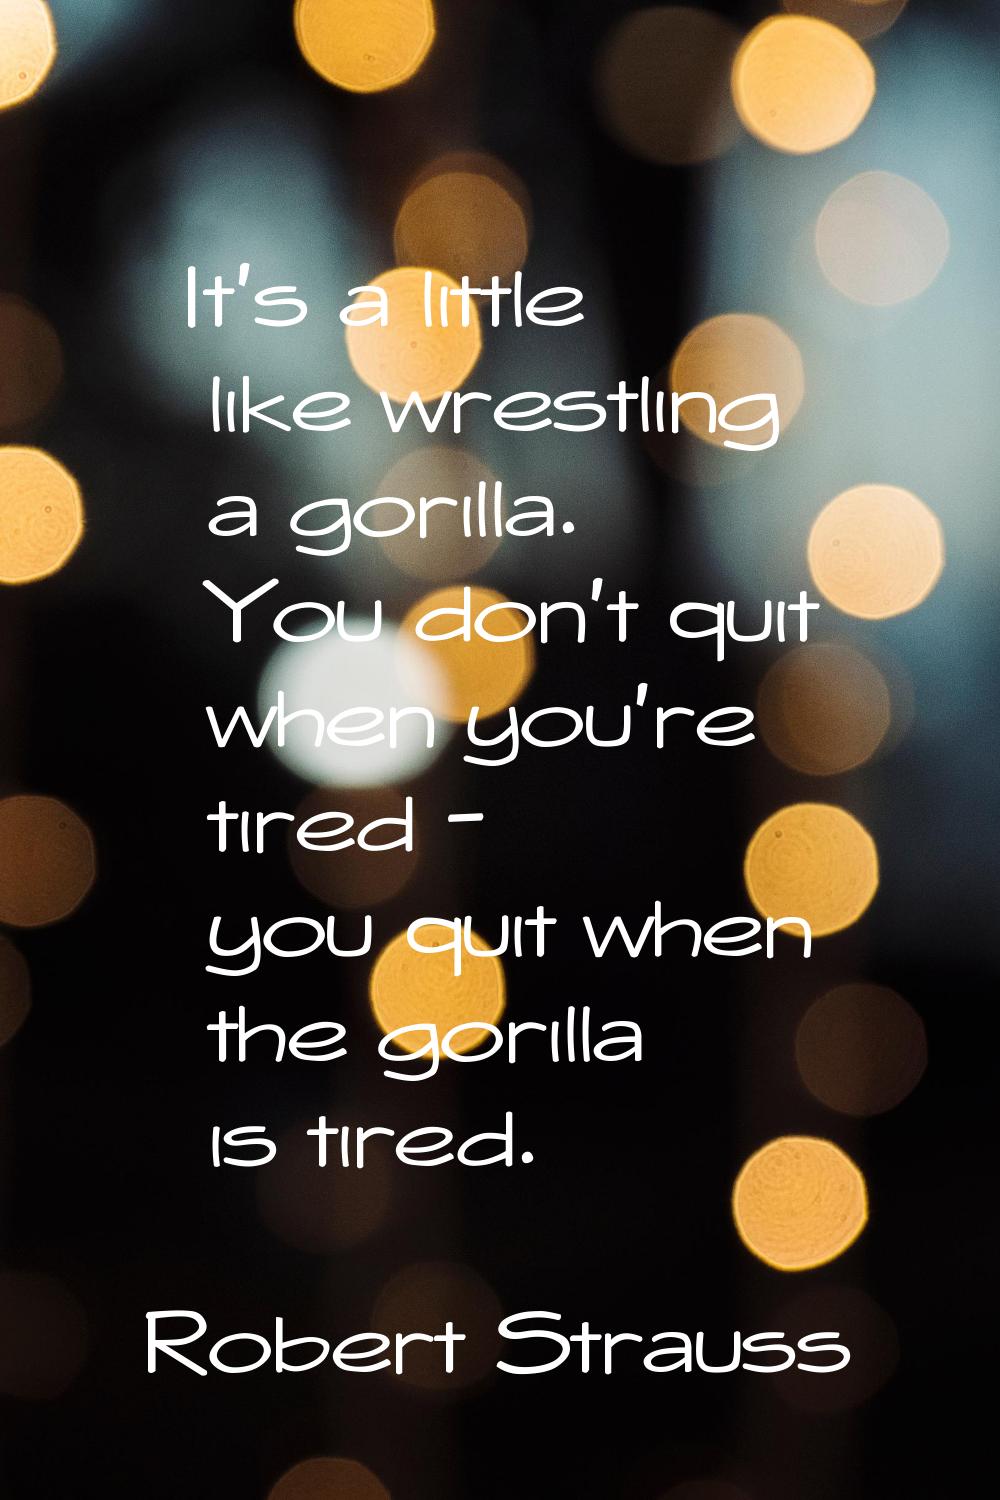 It's a little like wrestling a gorilla. You don't quit when you're tired - you quit when the gorill